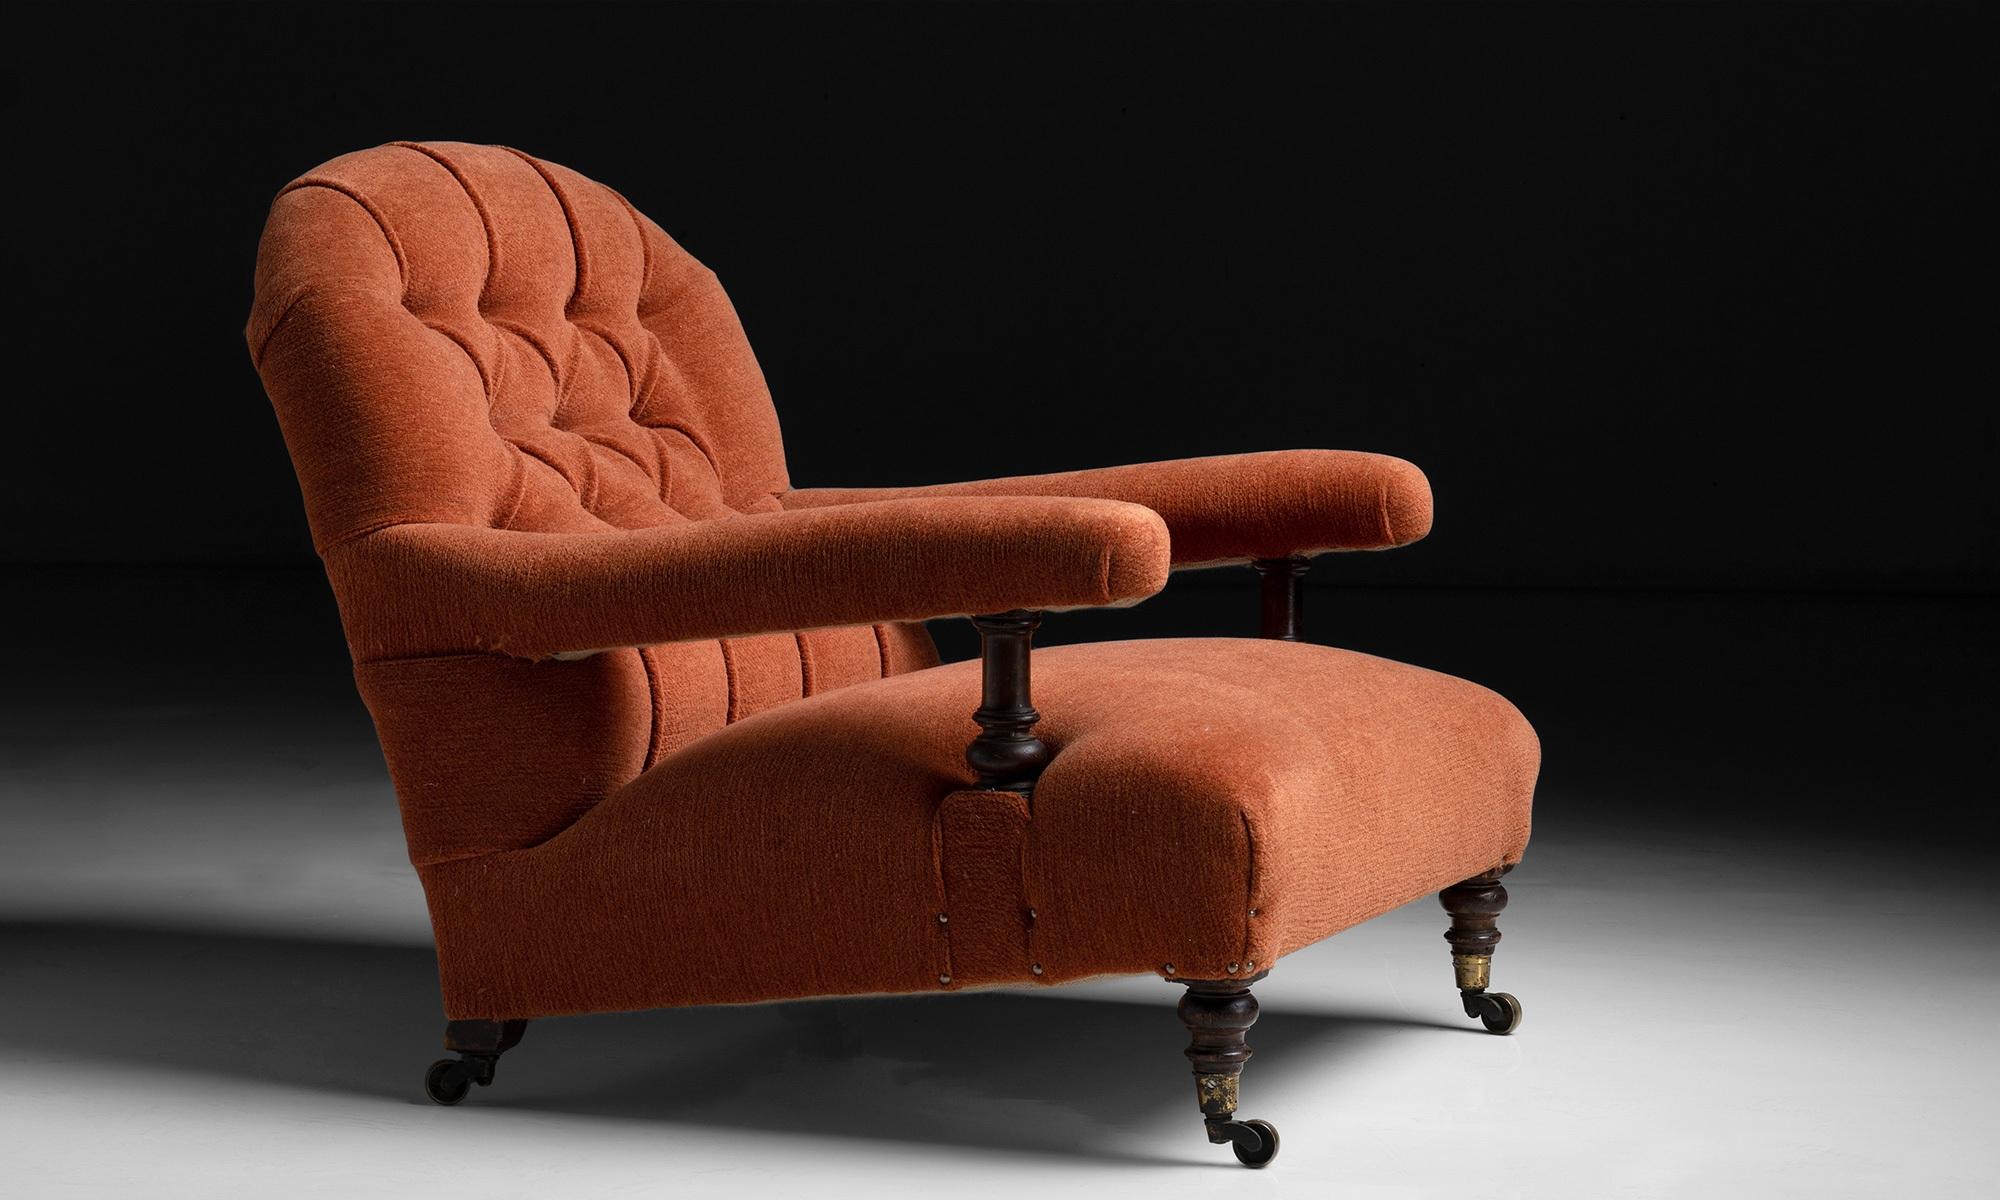 Howard & Sons open armchair in orange wool chenille.

England, circa 1890

Newly upholstered in wool chenille by Holland & Sherry on antique frame.

Measures: 30” Wx 37” D x 30” H x 15” seat.